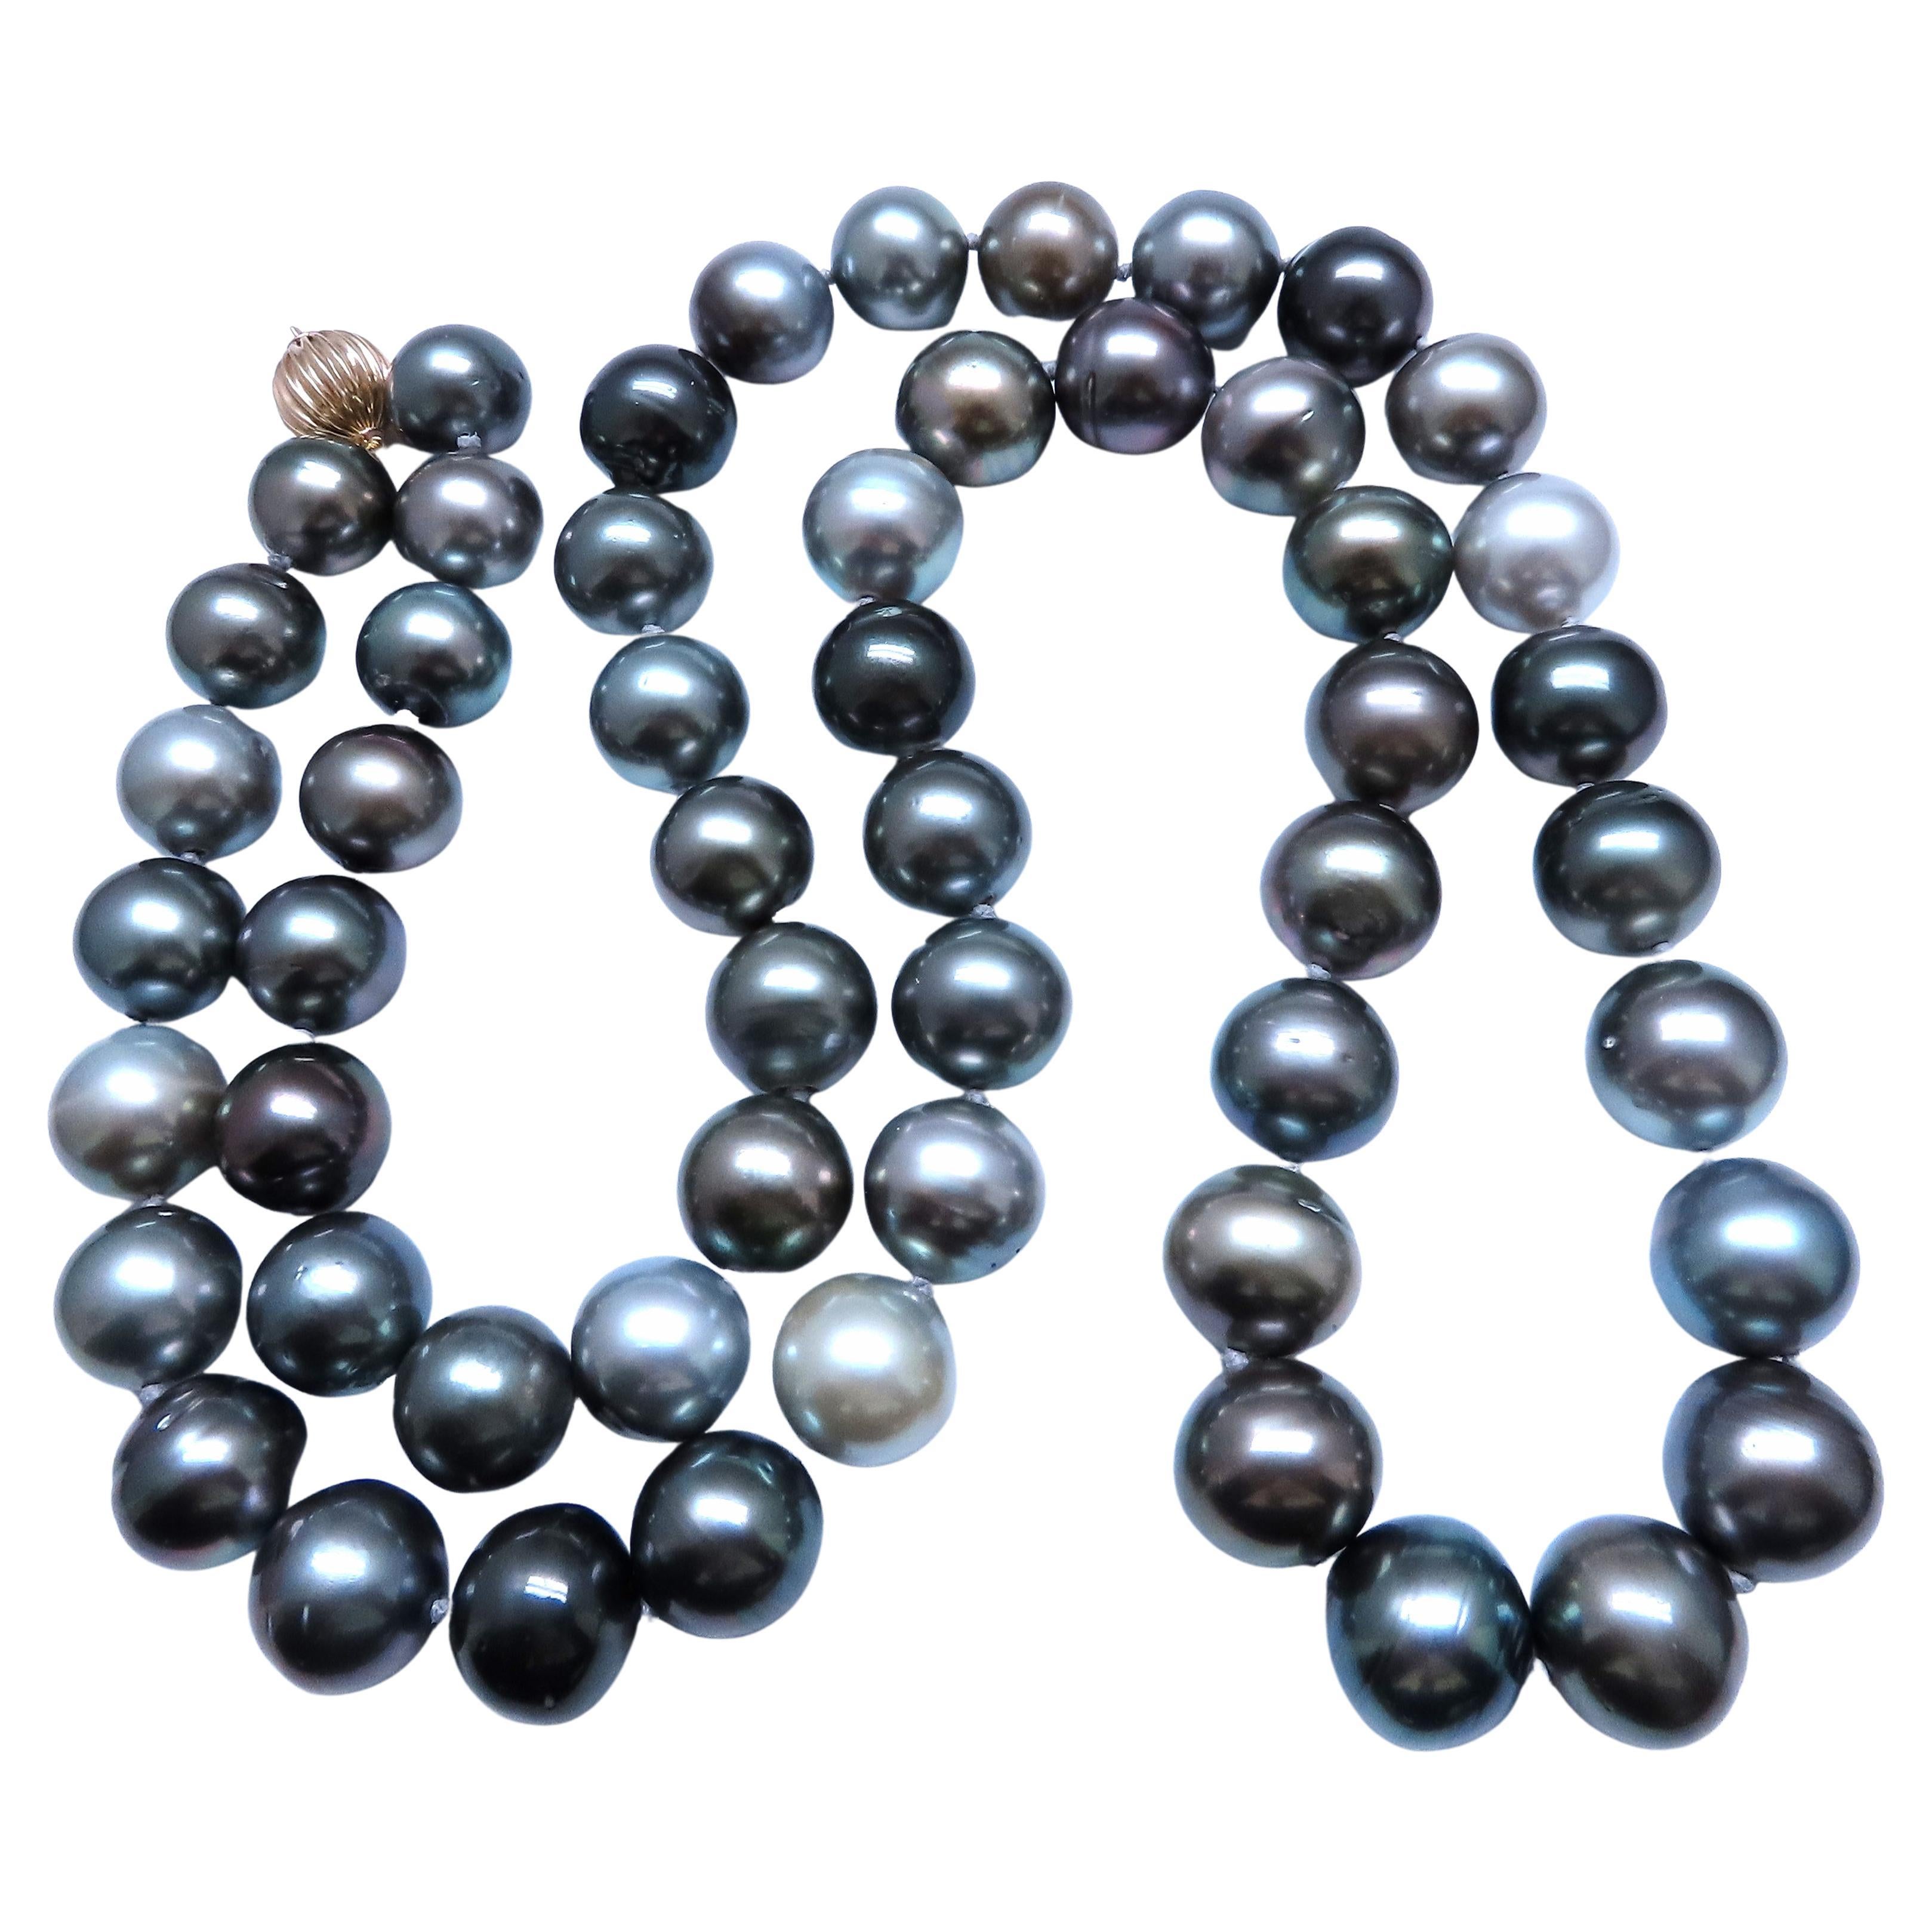 GIA Certified Natural Peacock Tahitian Pearls Necklace Double Wrap